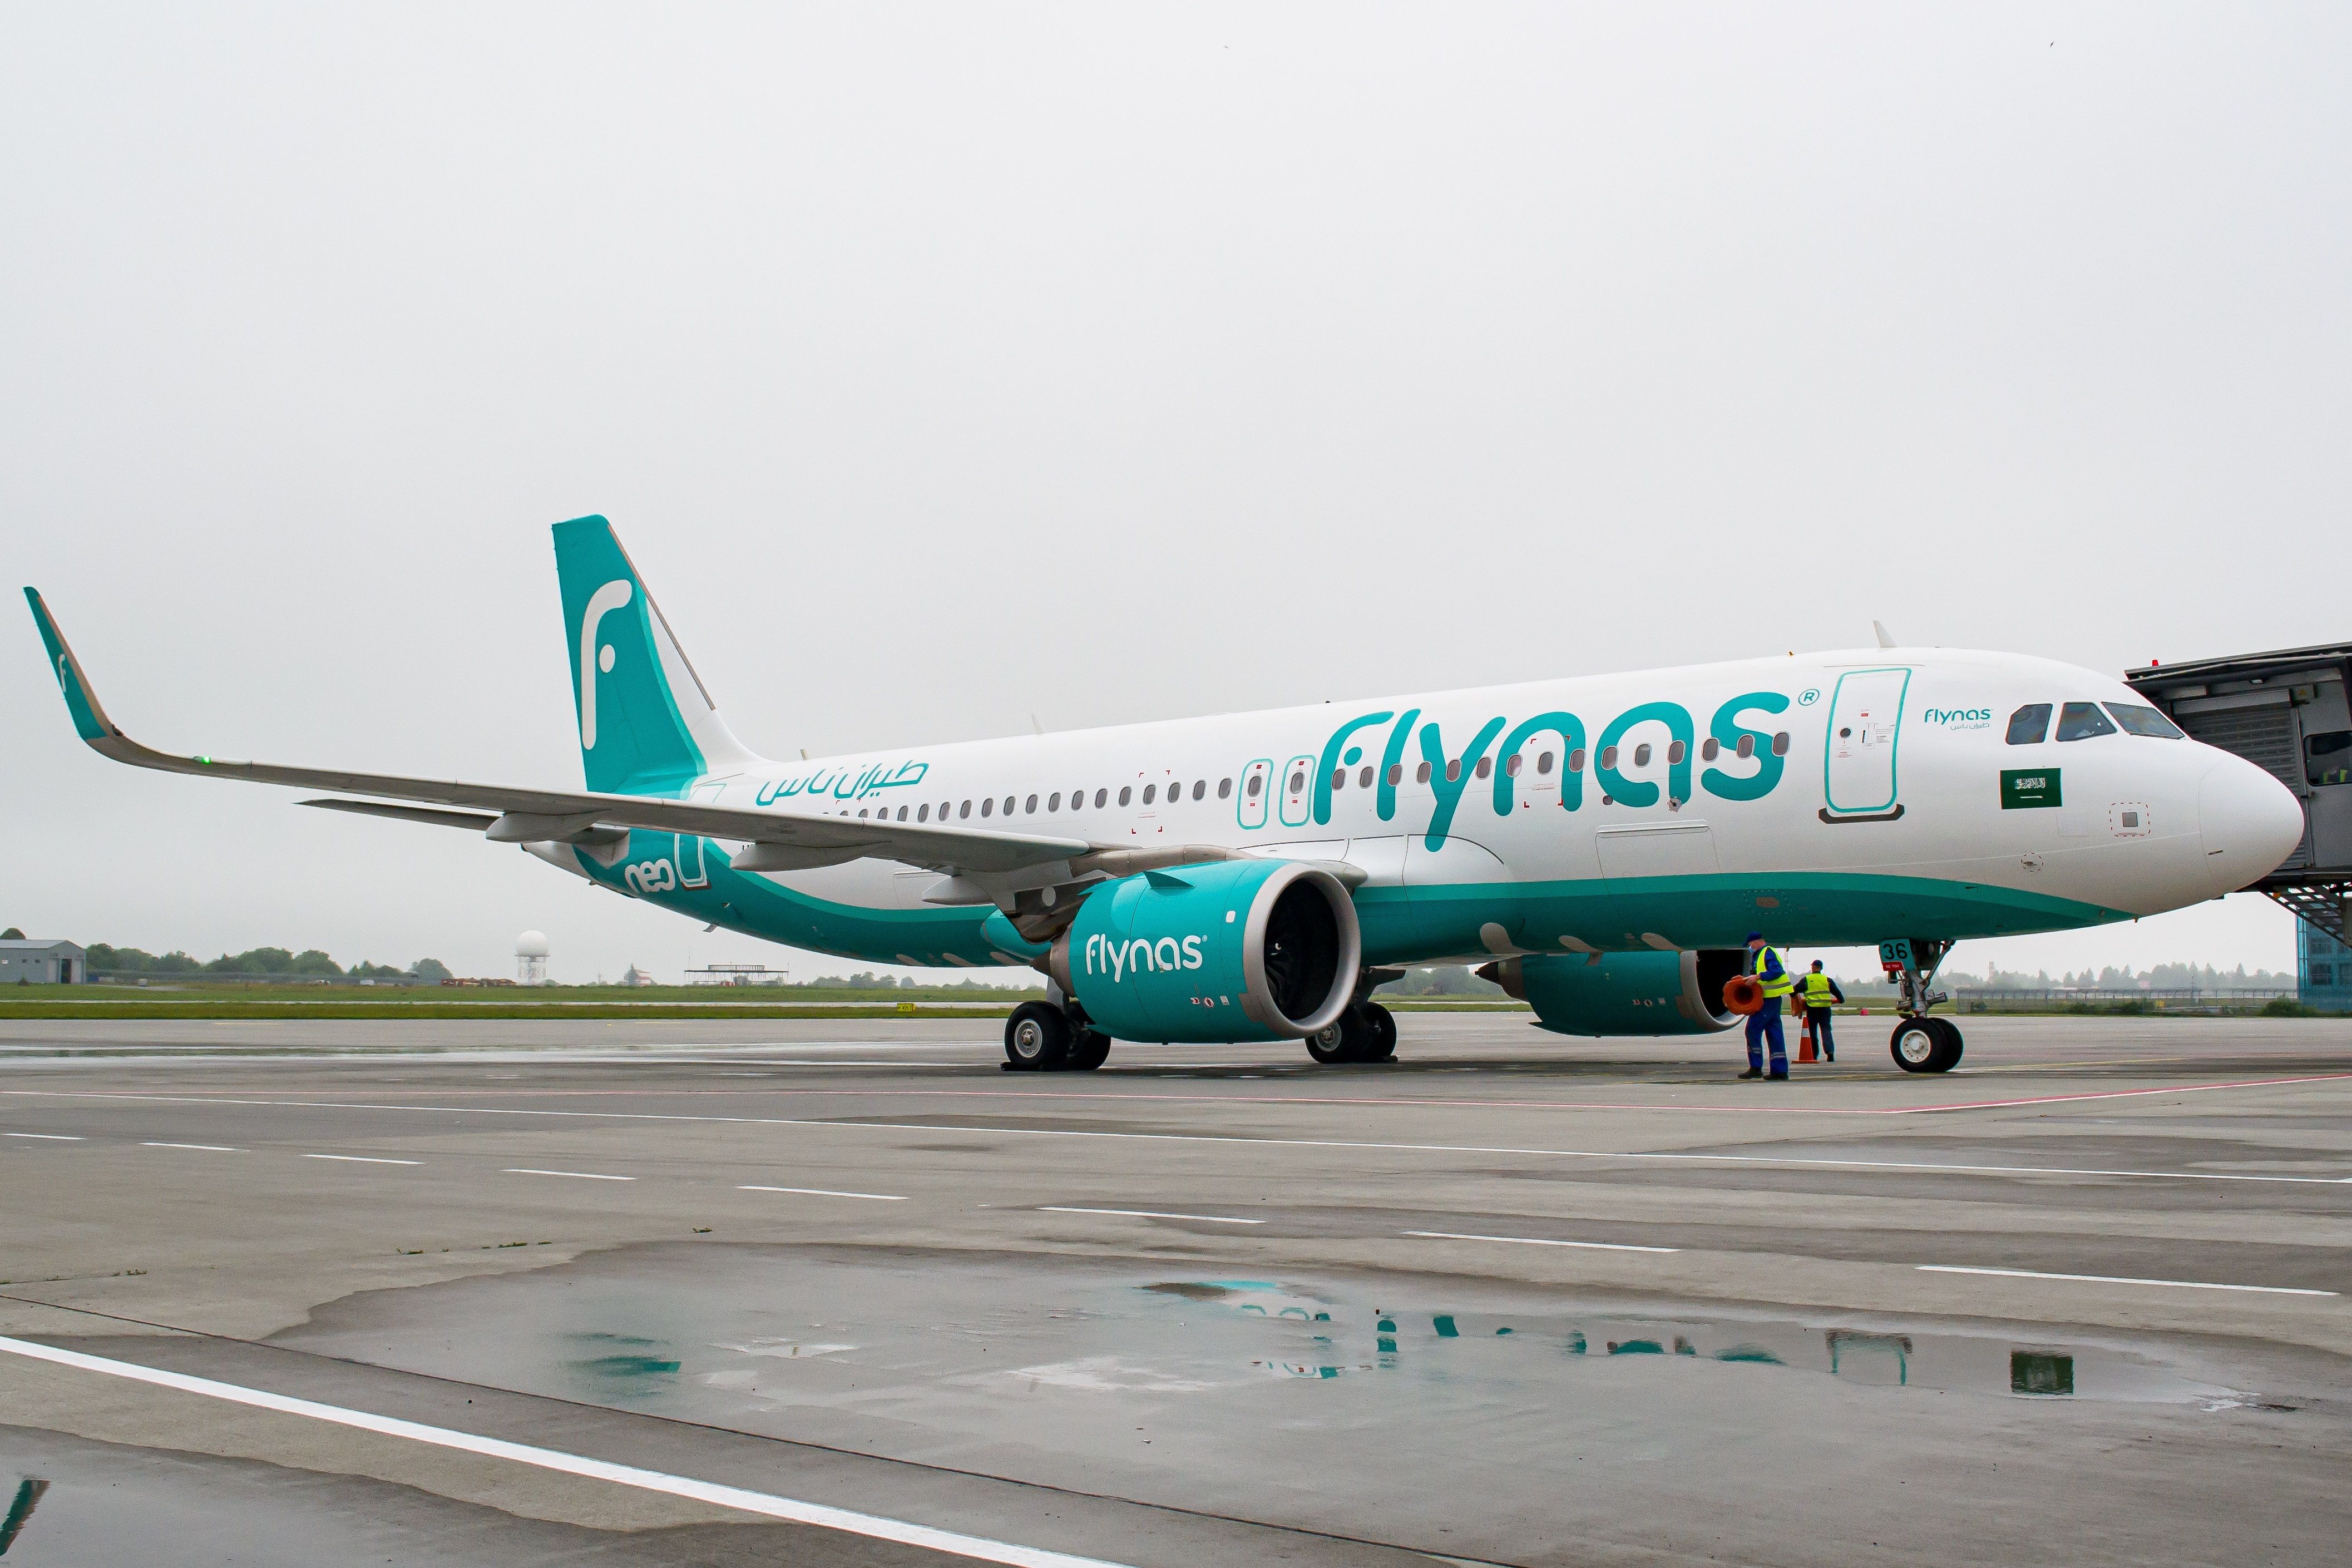 flynas A320neo on stand